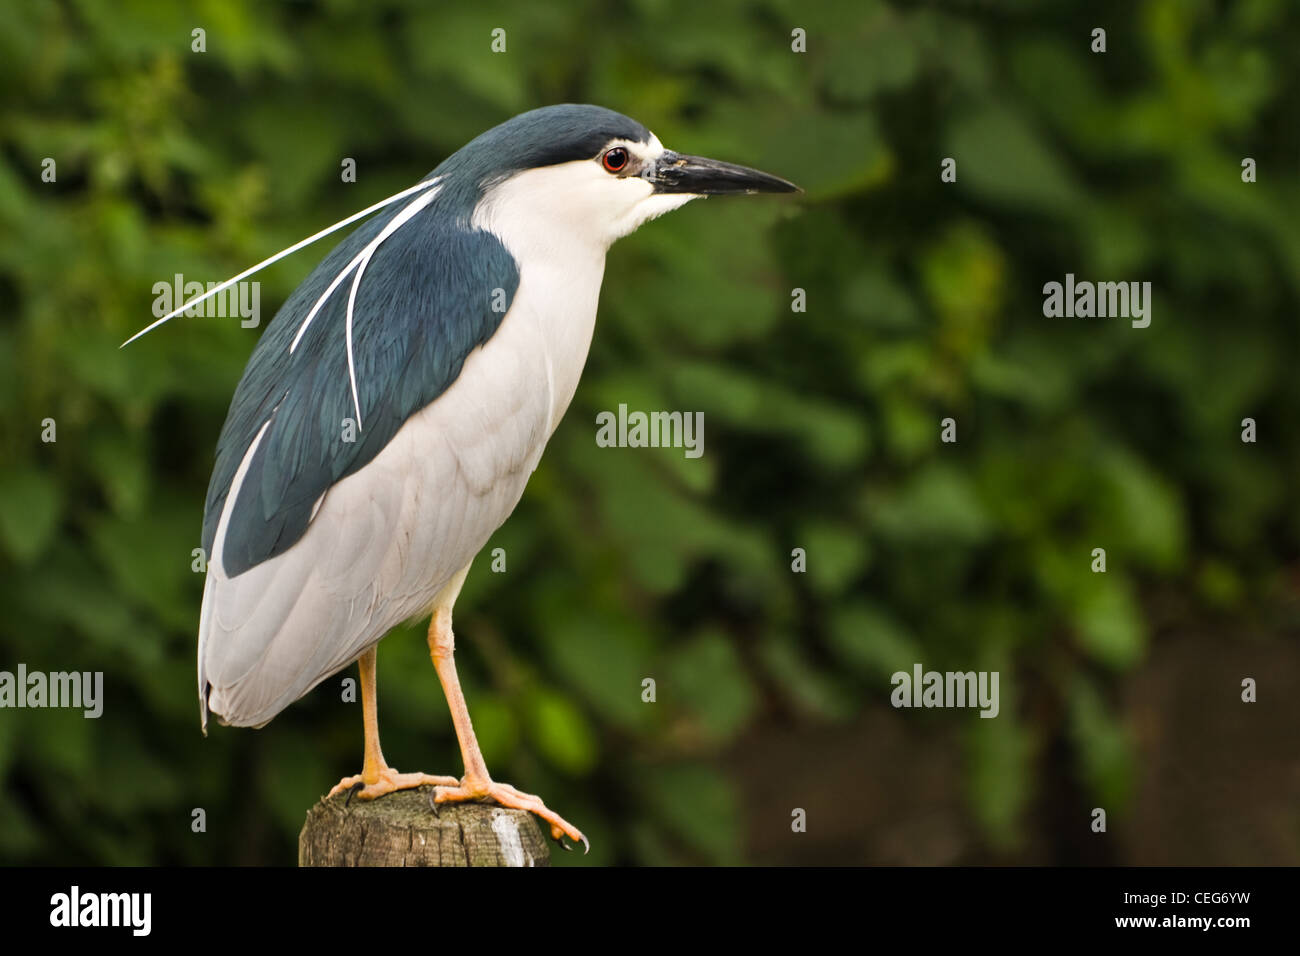 Black-crowned Night Heron or Nycticorax nycticorax in side angle view sitting on stake. Mostly hiding by day. Stock Photo